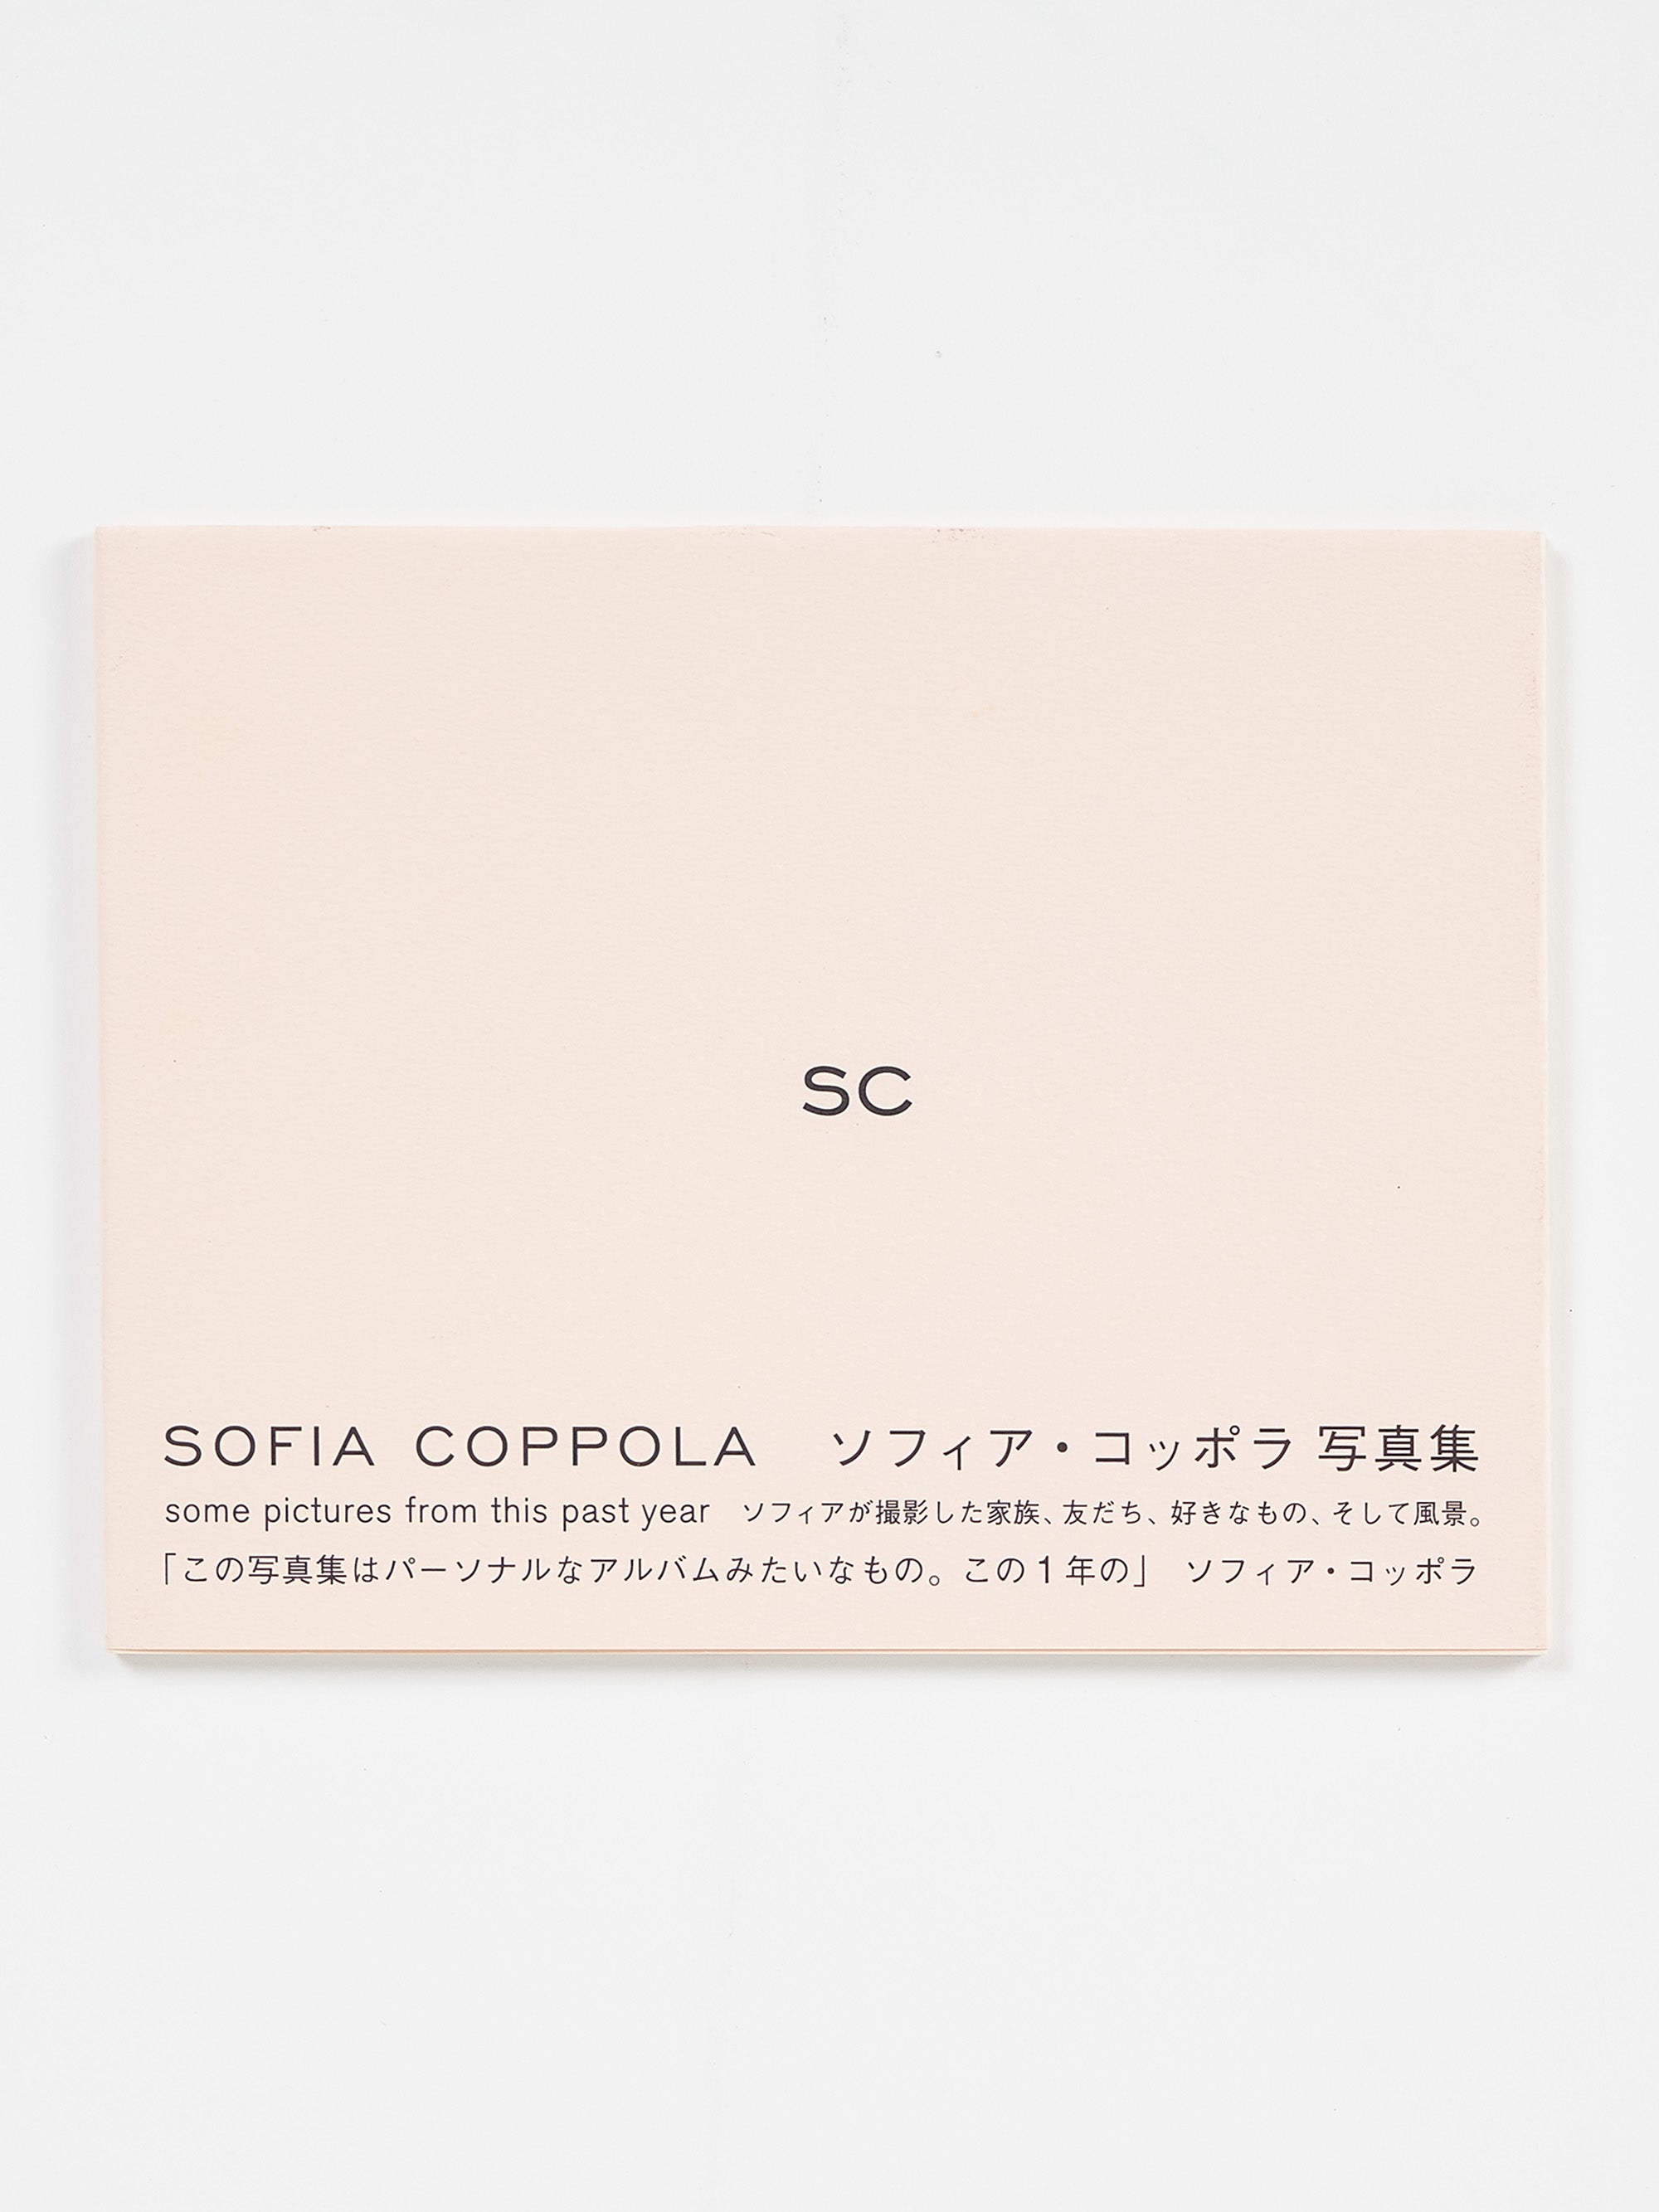 SC (Some Pictures From This Past Year), Sofia Coppola